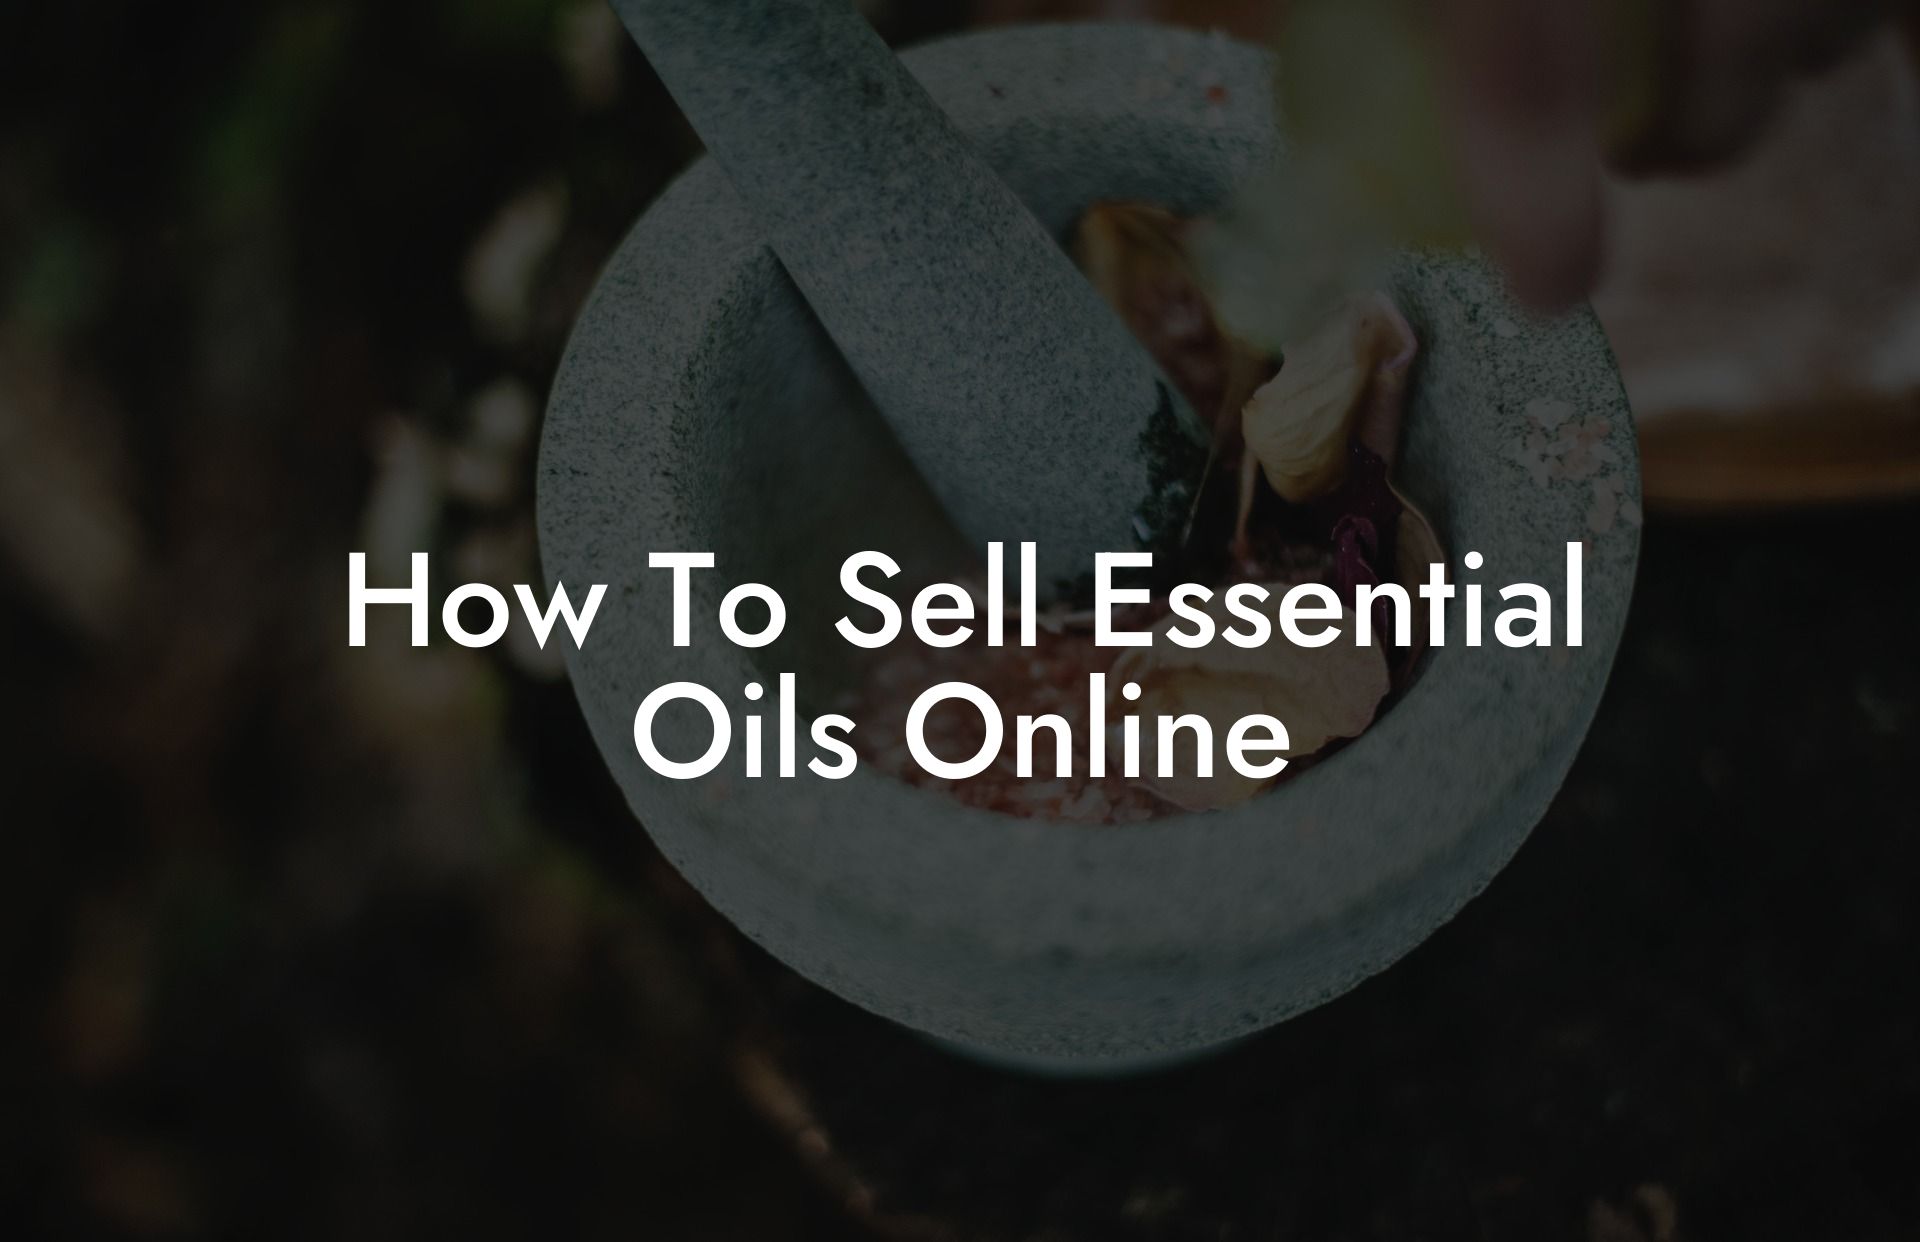 How To Sell Essential Oils Online